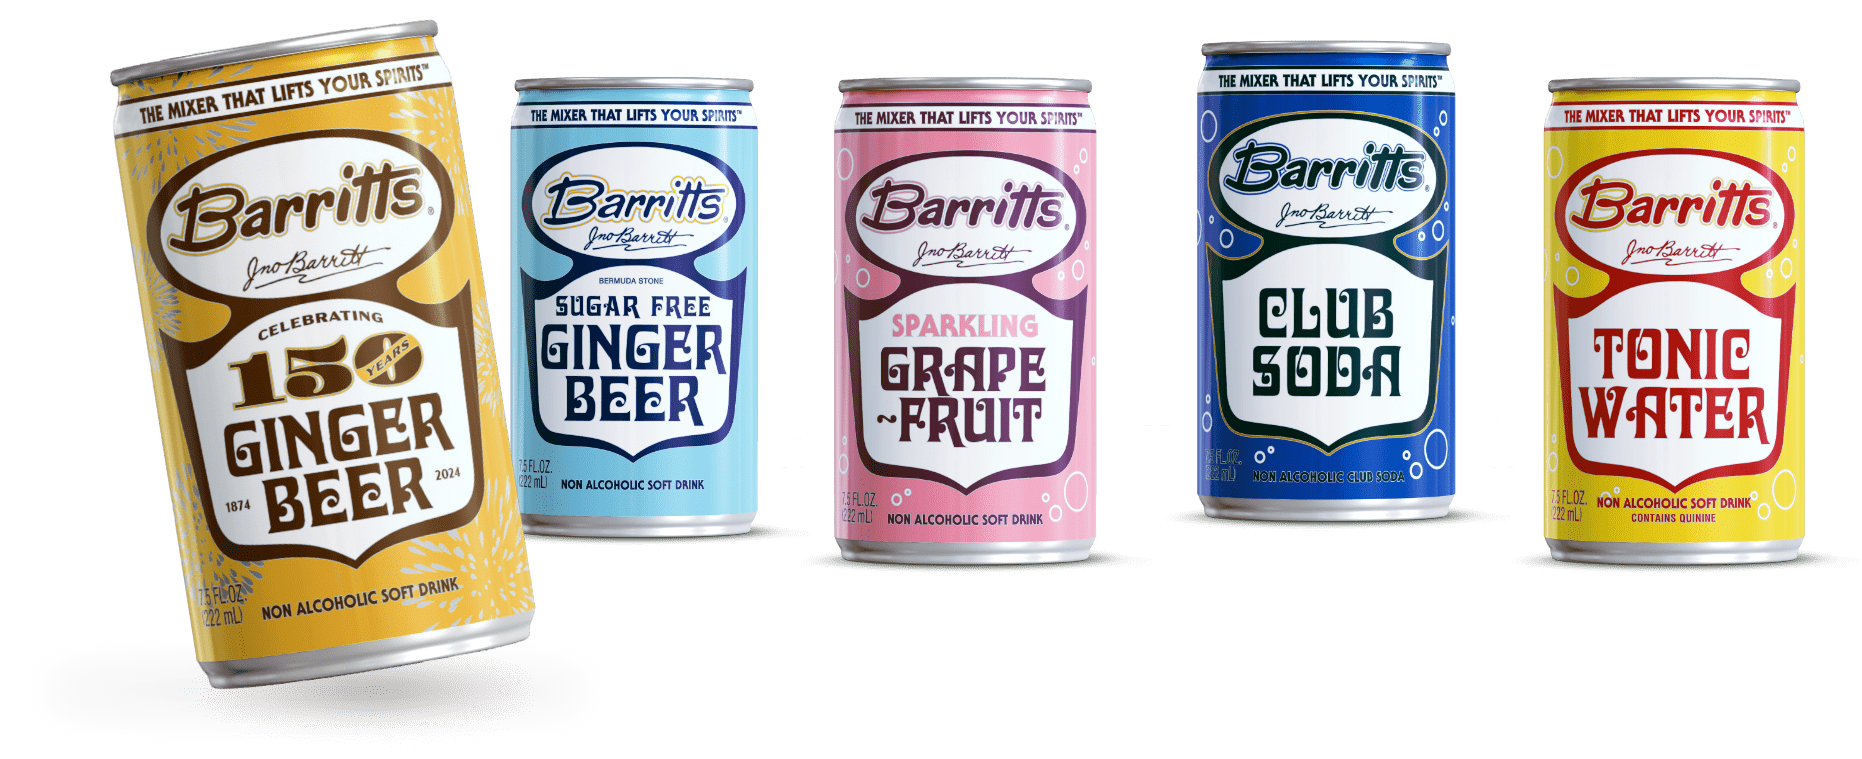 Cans of the 6 different Barritt's mixers in a line